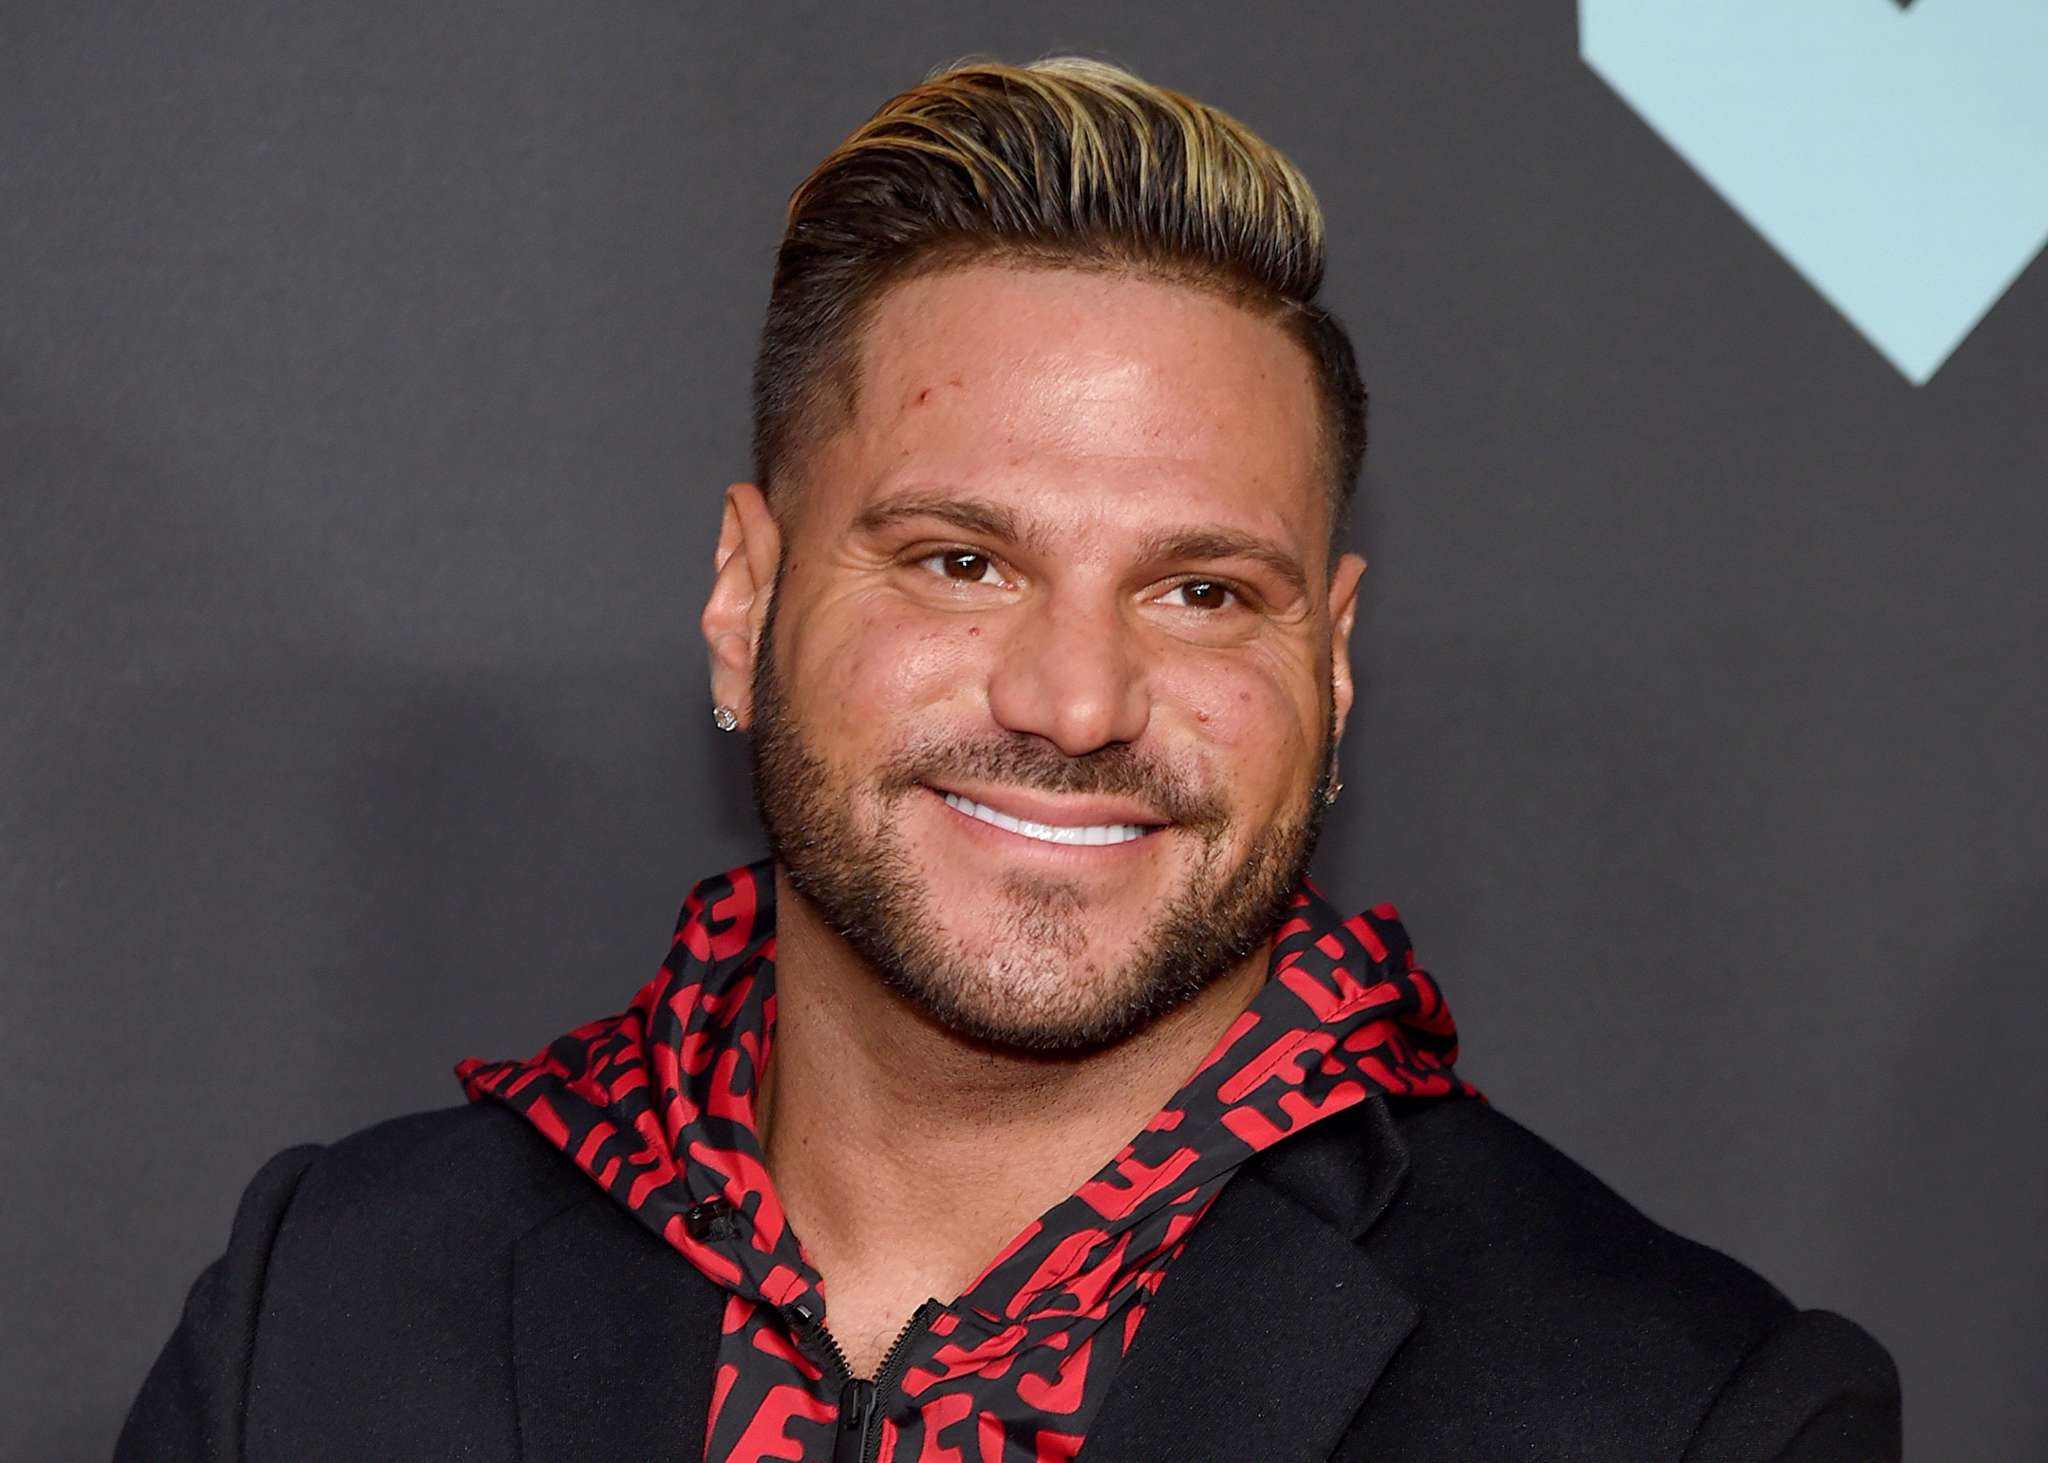 ronnie-ortiz-magro-breaks-his-silence-after-arrest